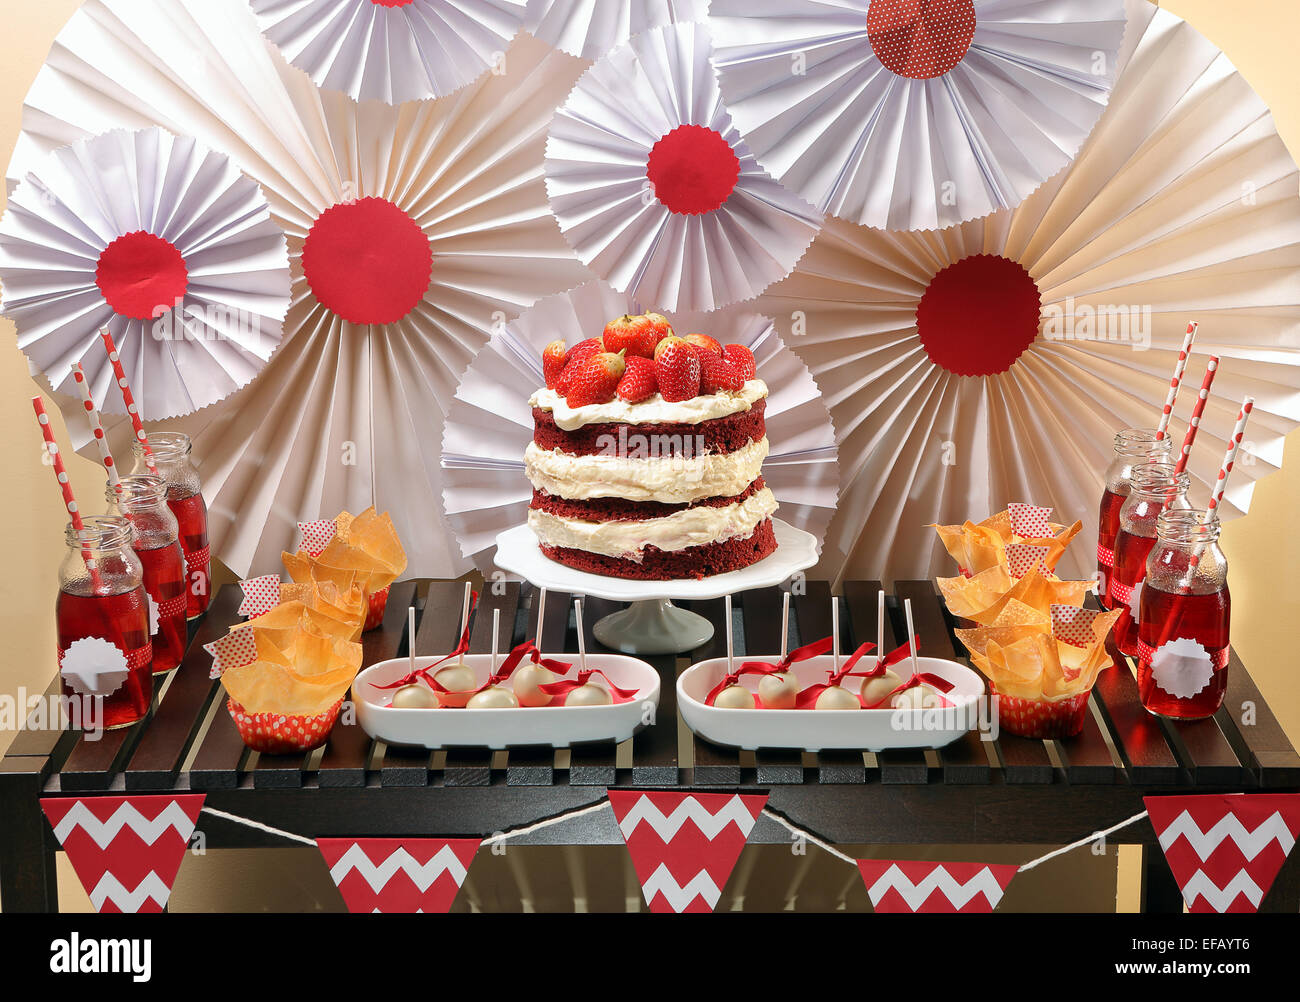 Valentine's Day party table with red velvet cake Stock Photo